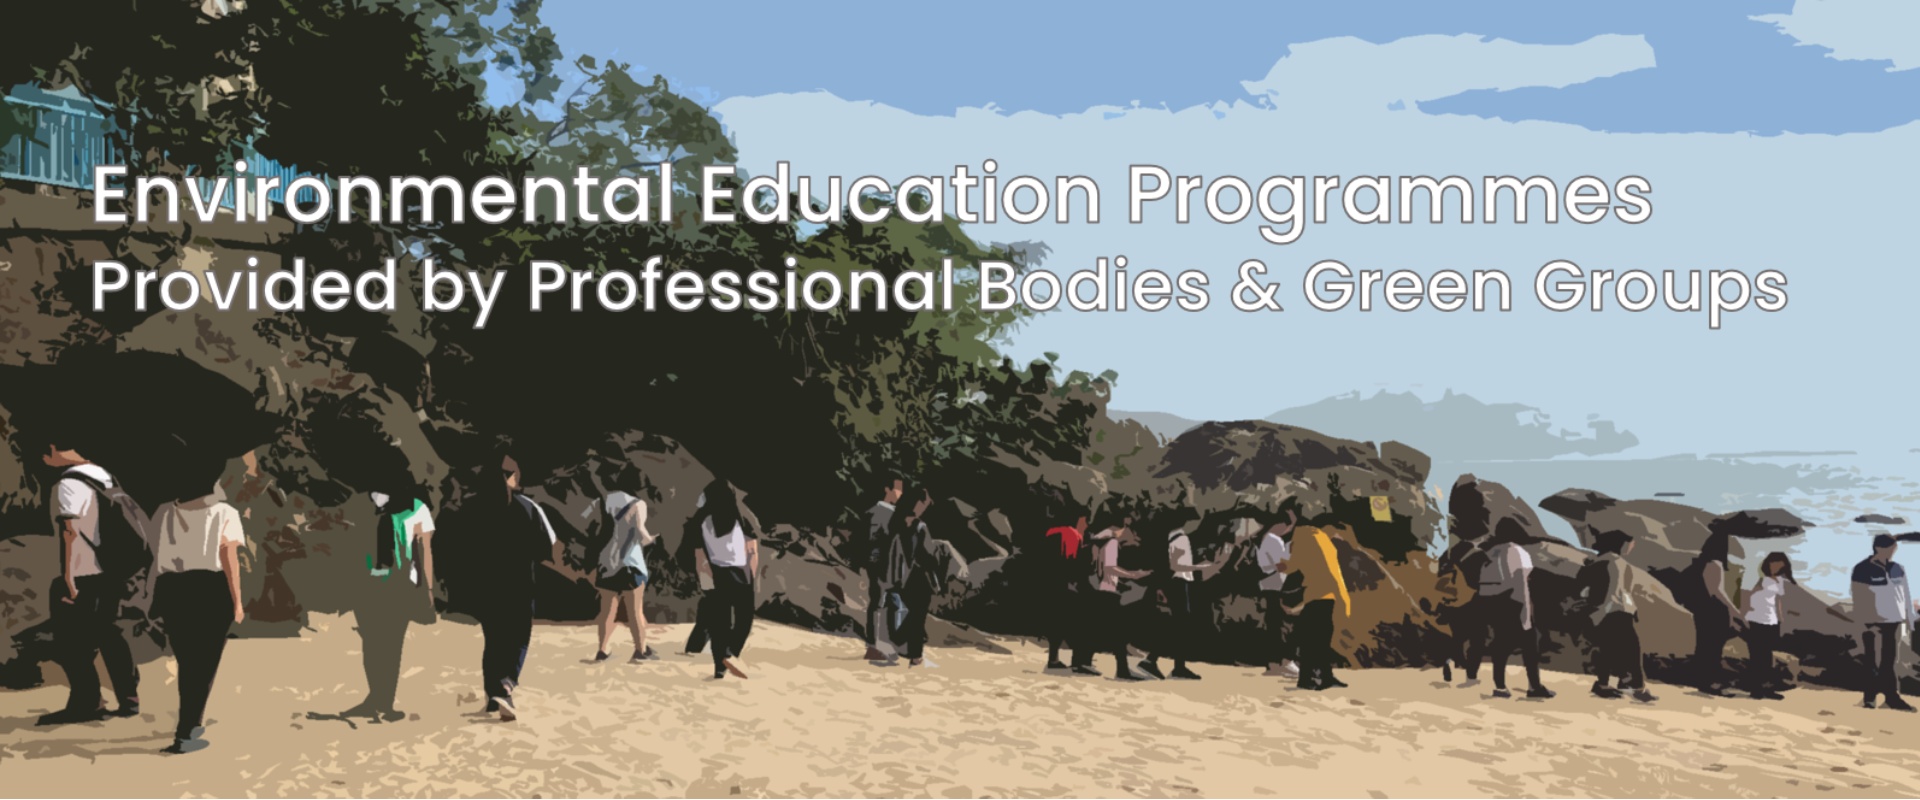 Environmental Education Programmes Provided by Professional Bodies & Green Groups